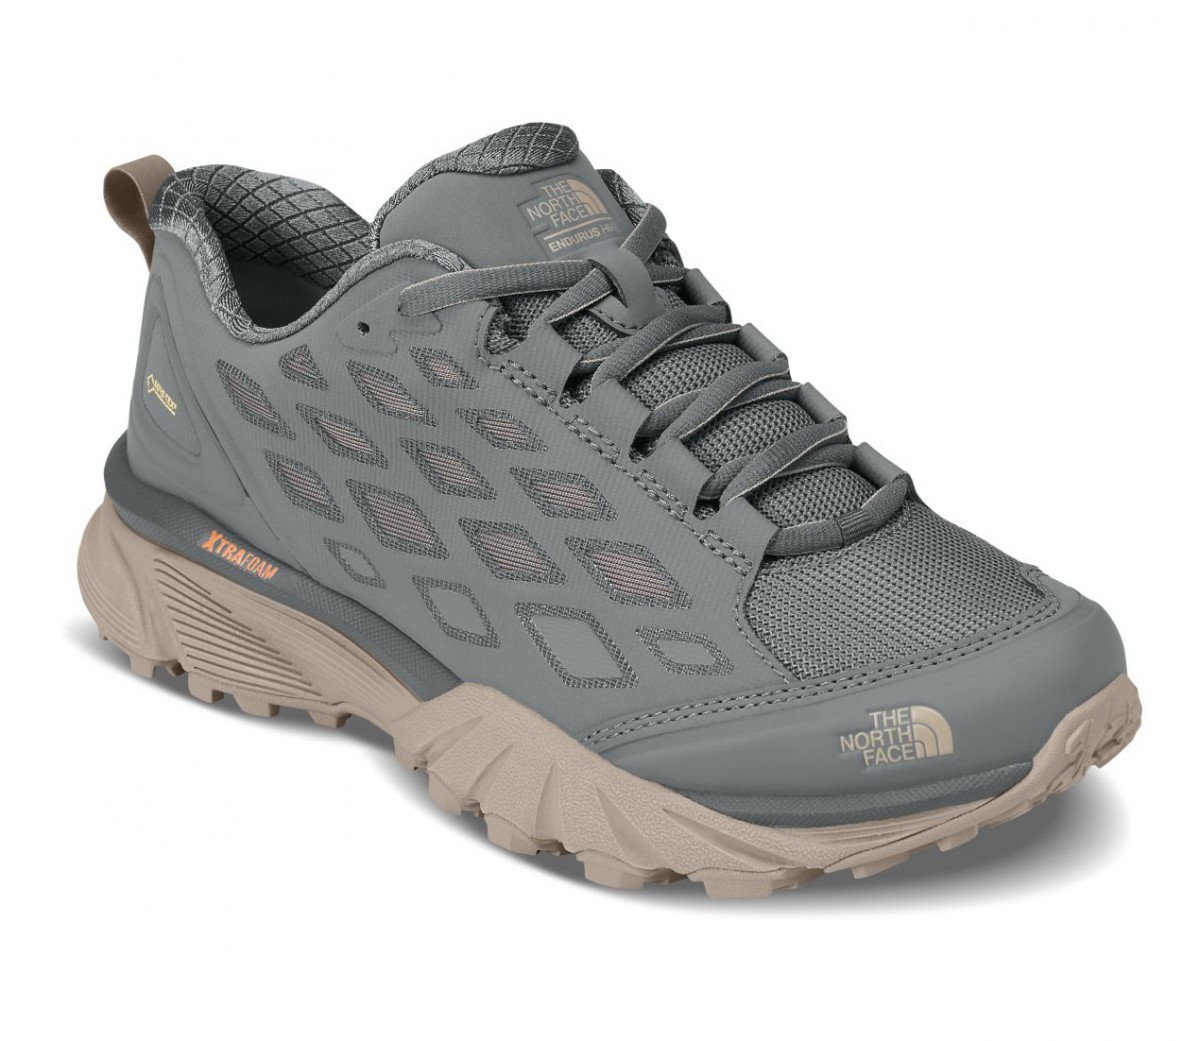 The North Face Endurus Hike GTX Review